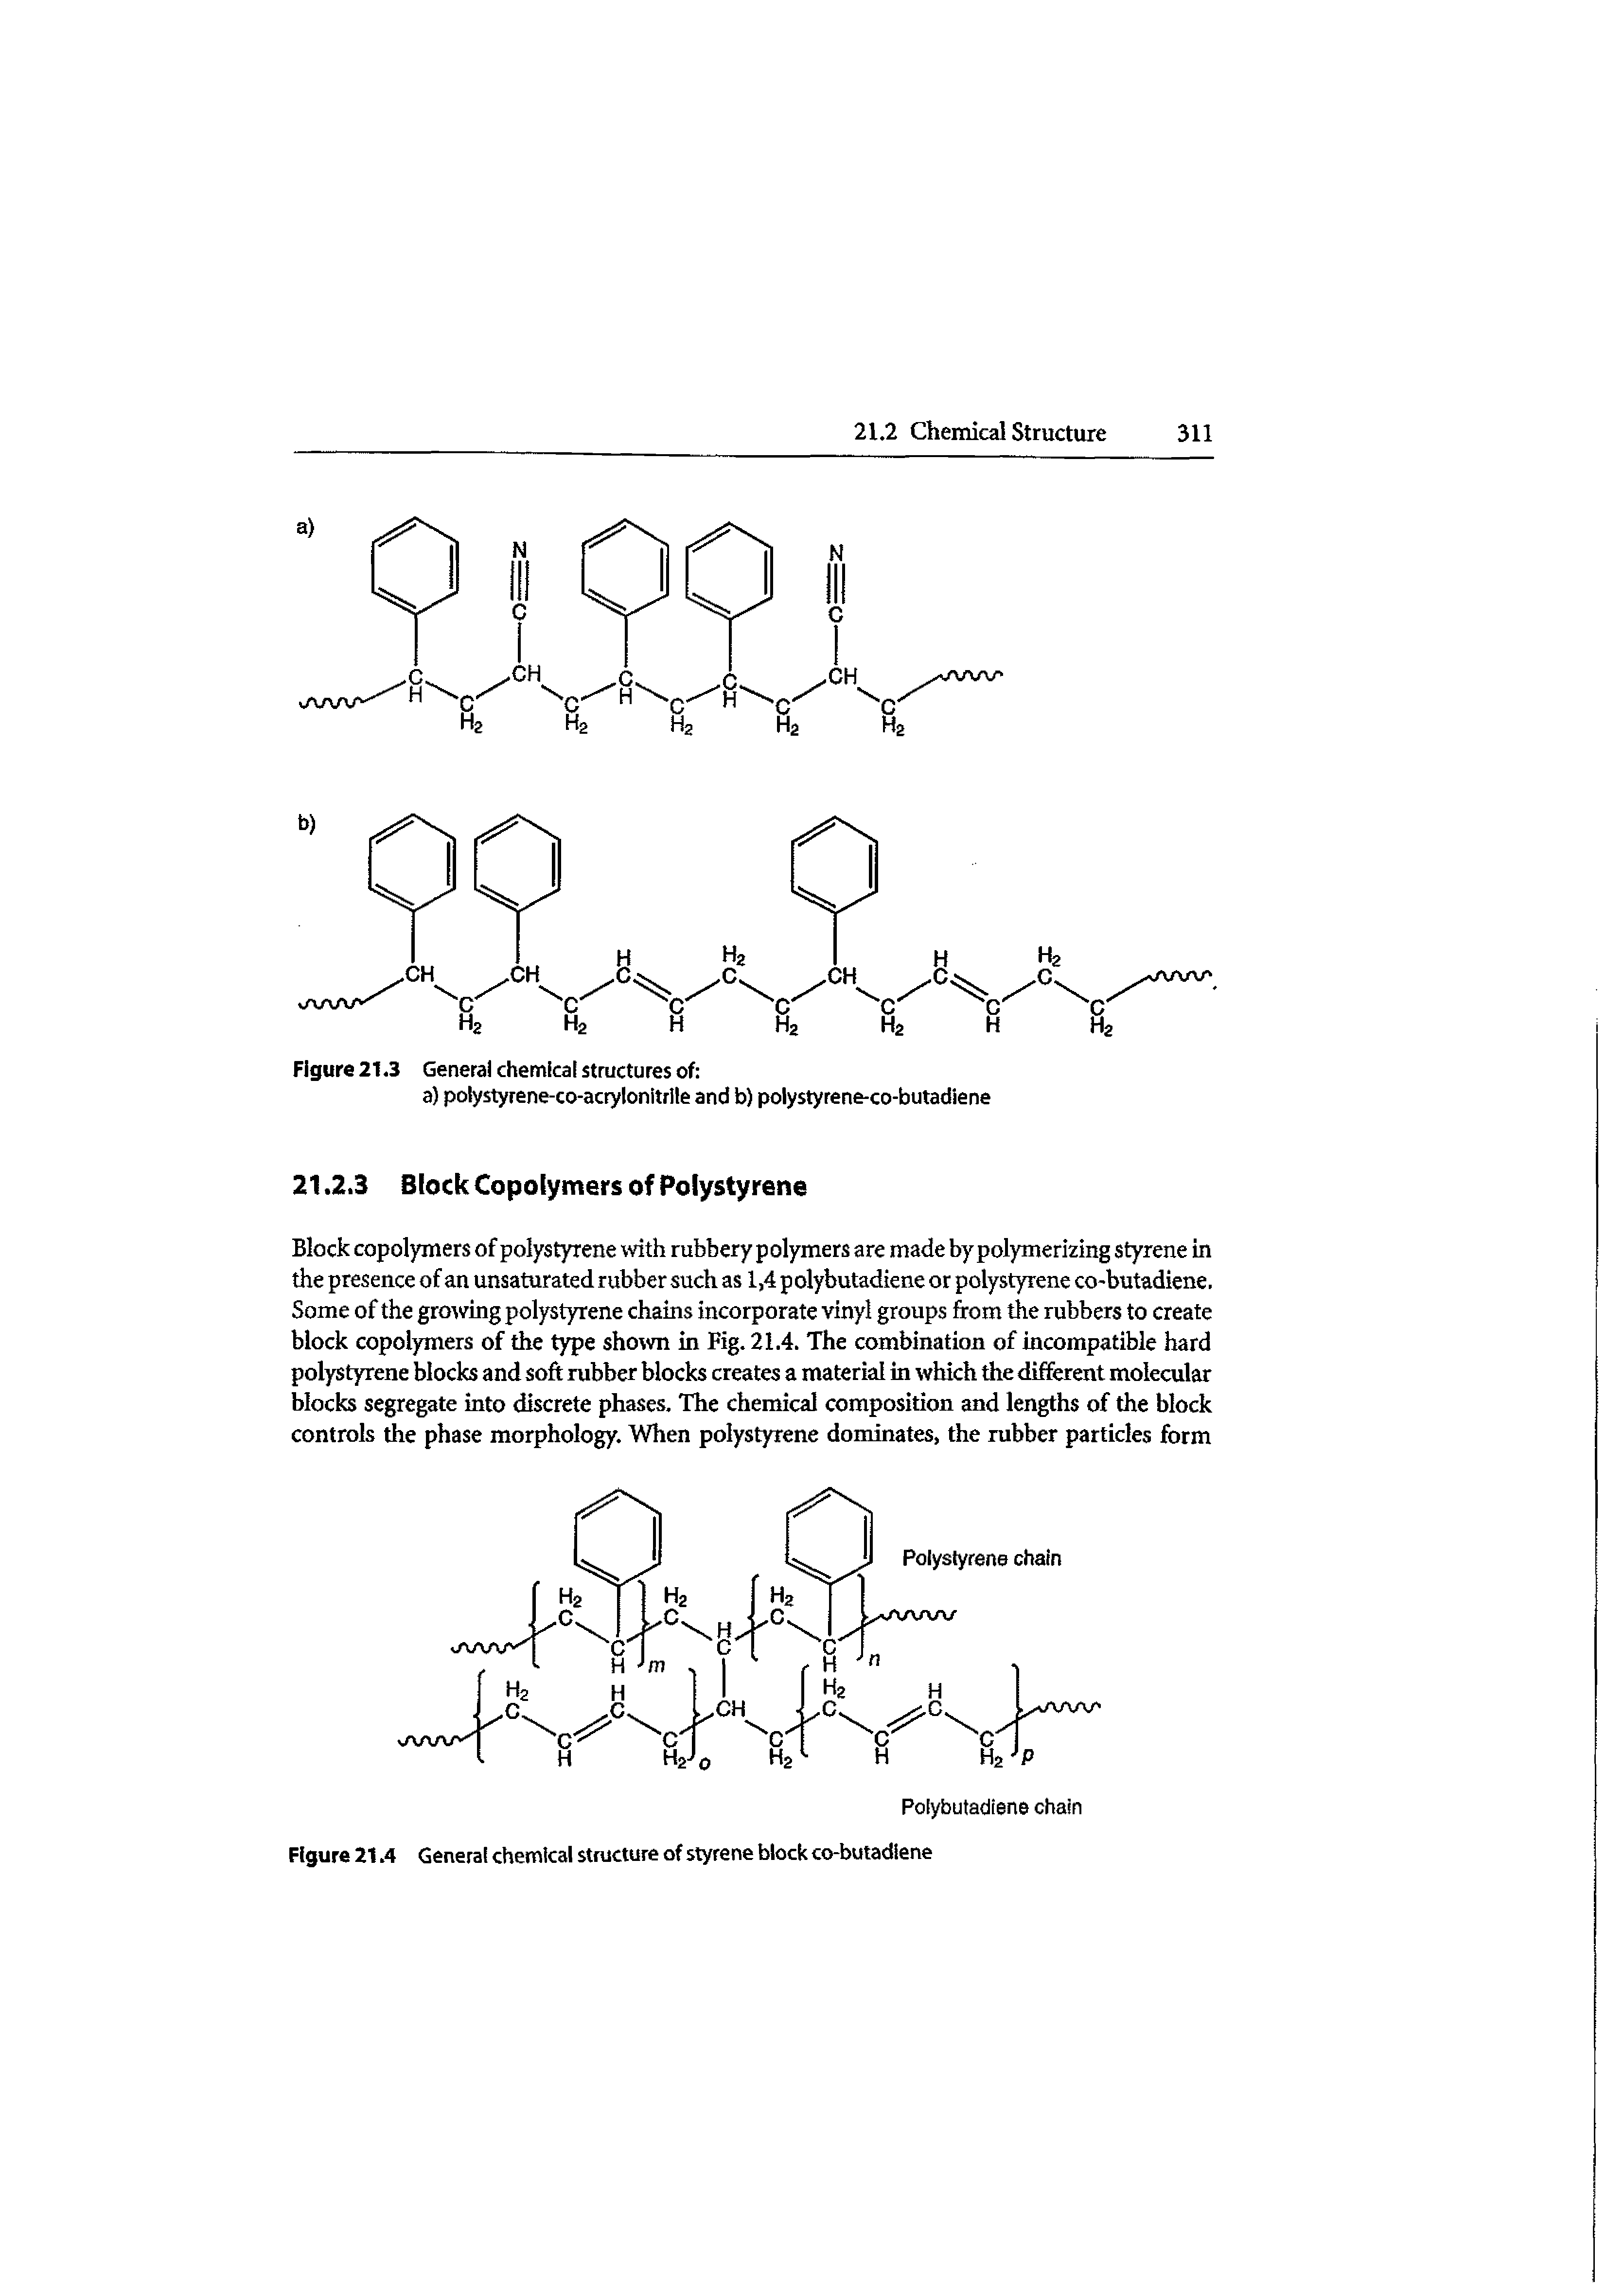 Figure 21.4 General chemical structure of styrene block co-butadiene...